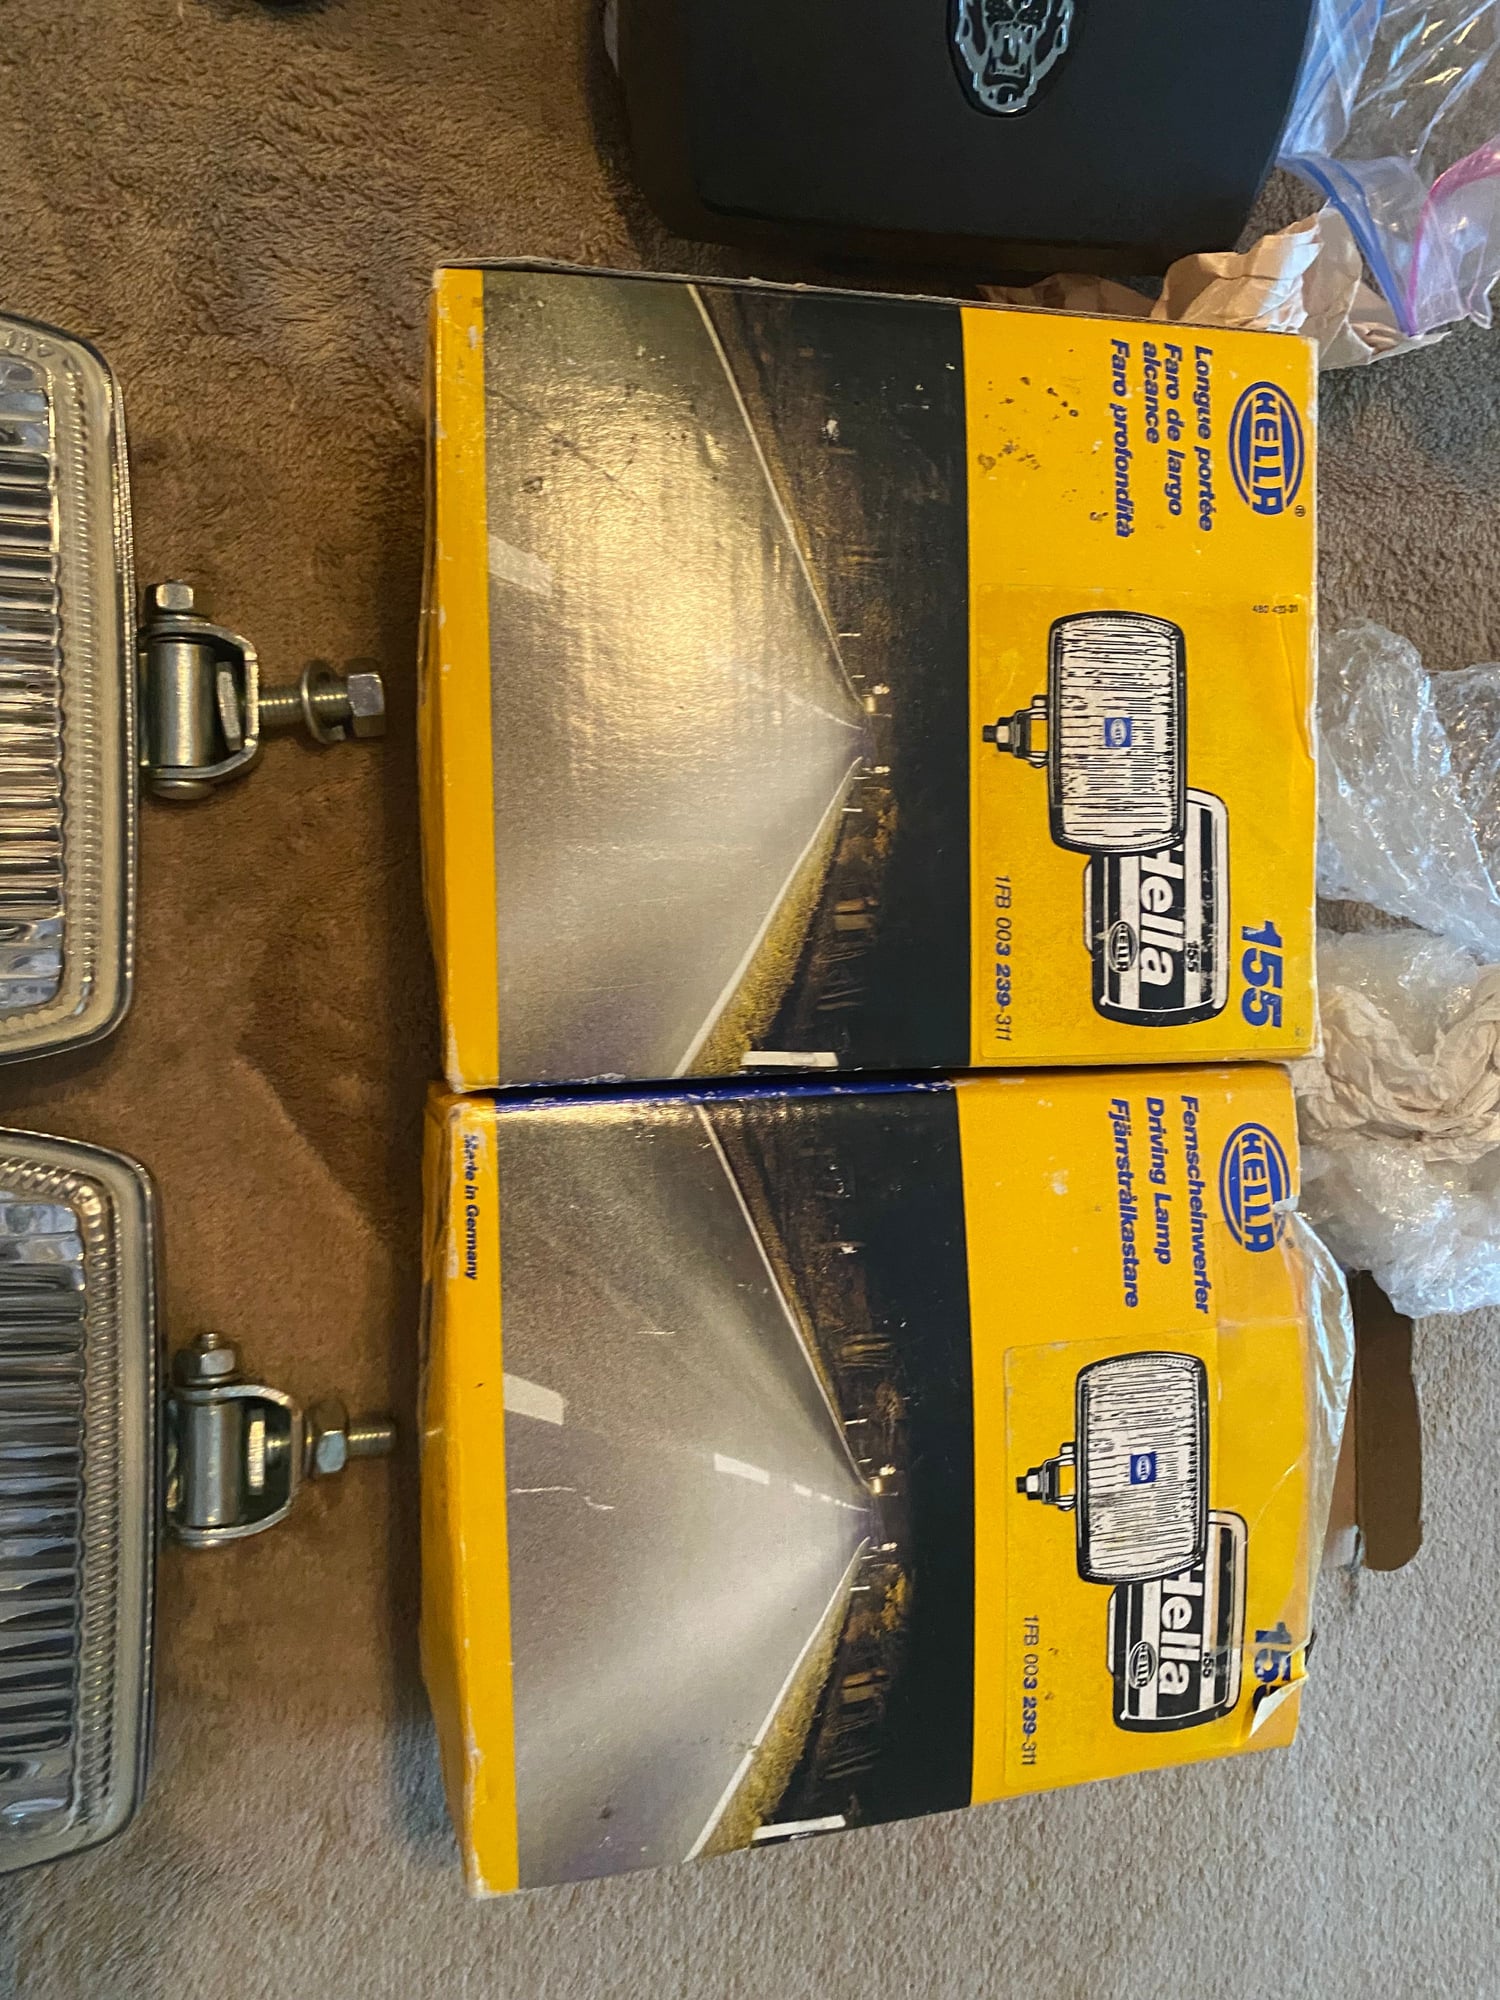 Lights - Brand new oem nos hella xjs fog lamps with new jaguar covers - New - All Years Jaguar XJS - Houston, TX 77077, United States